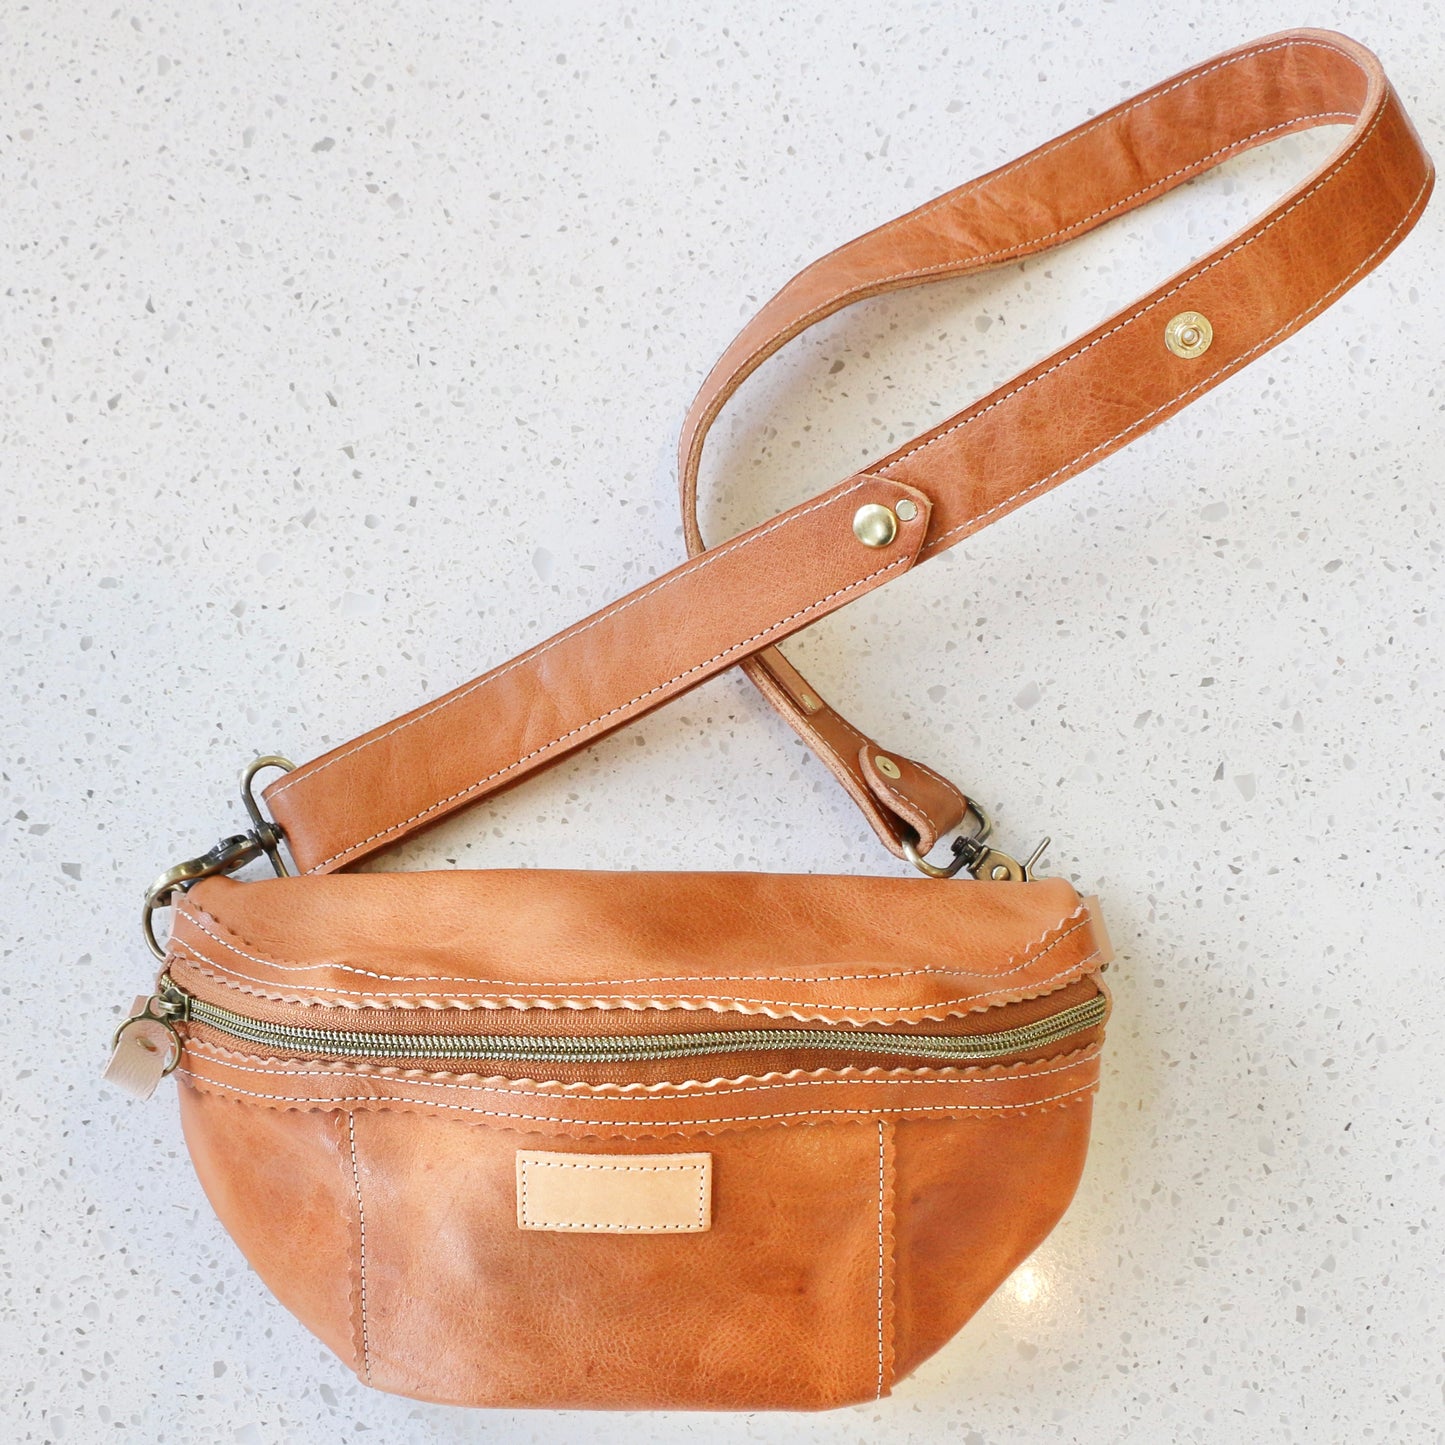 Better Than A Fanny Pack - Camel (Pouch Only) Fanny Packs Indigo Laine and Company   